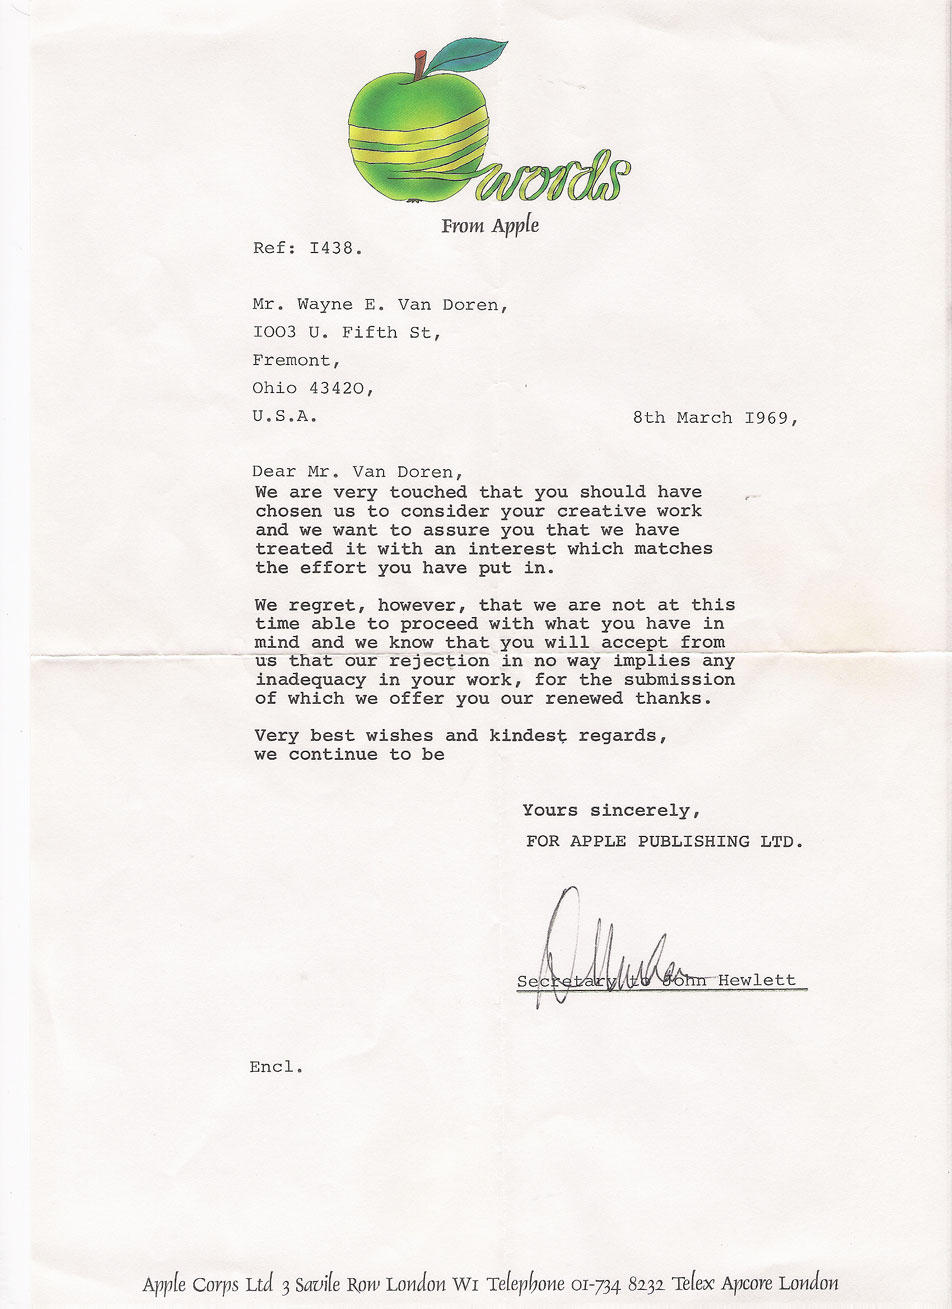  Mail Order's rejection letter from Apple Corps